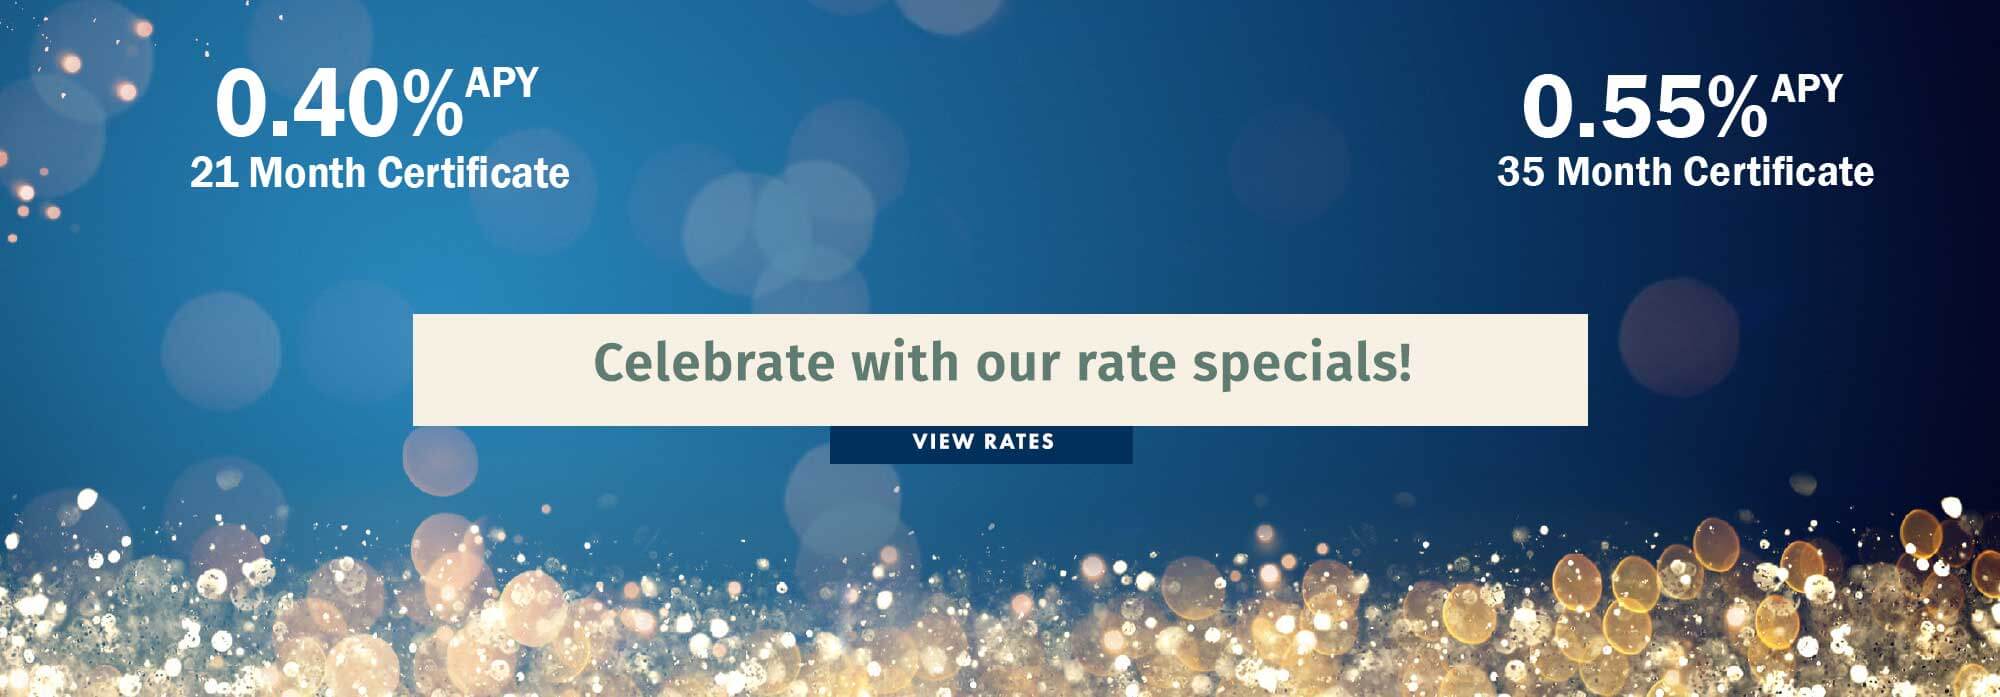 Celebrate with our rate specials!